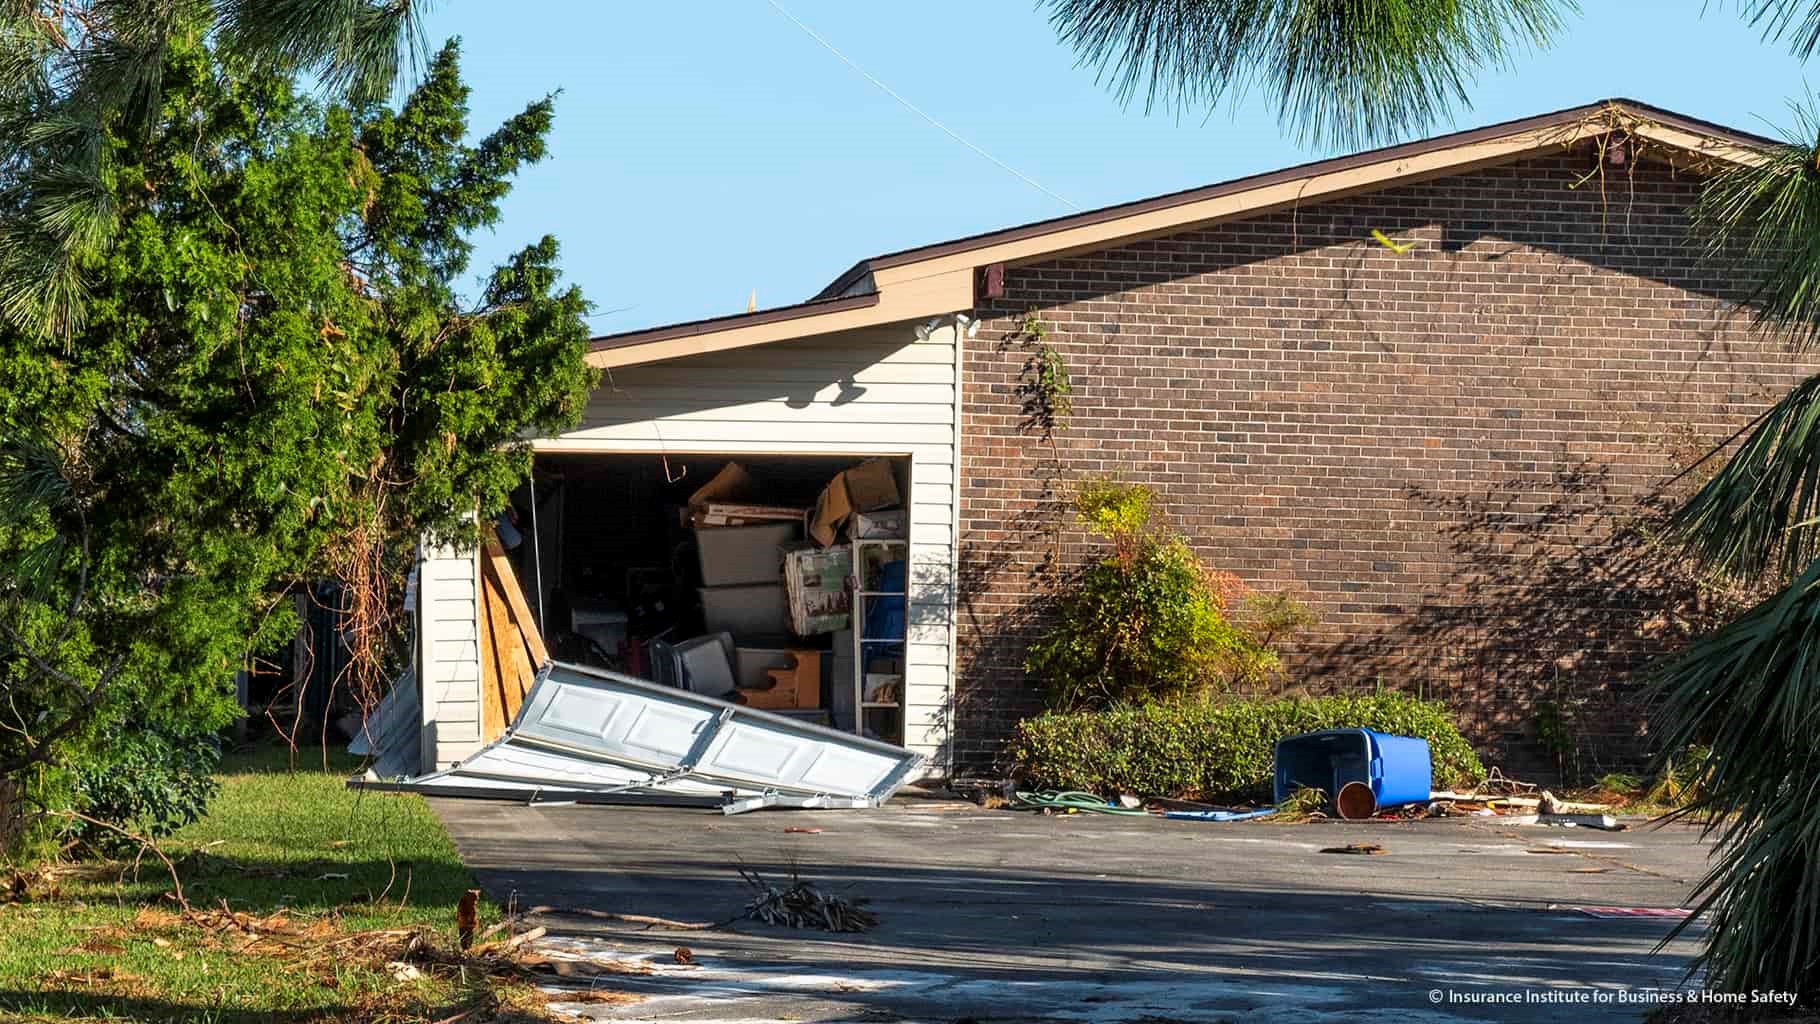 Negative pressures caused by high winds pulled this garage door out of its tracks.